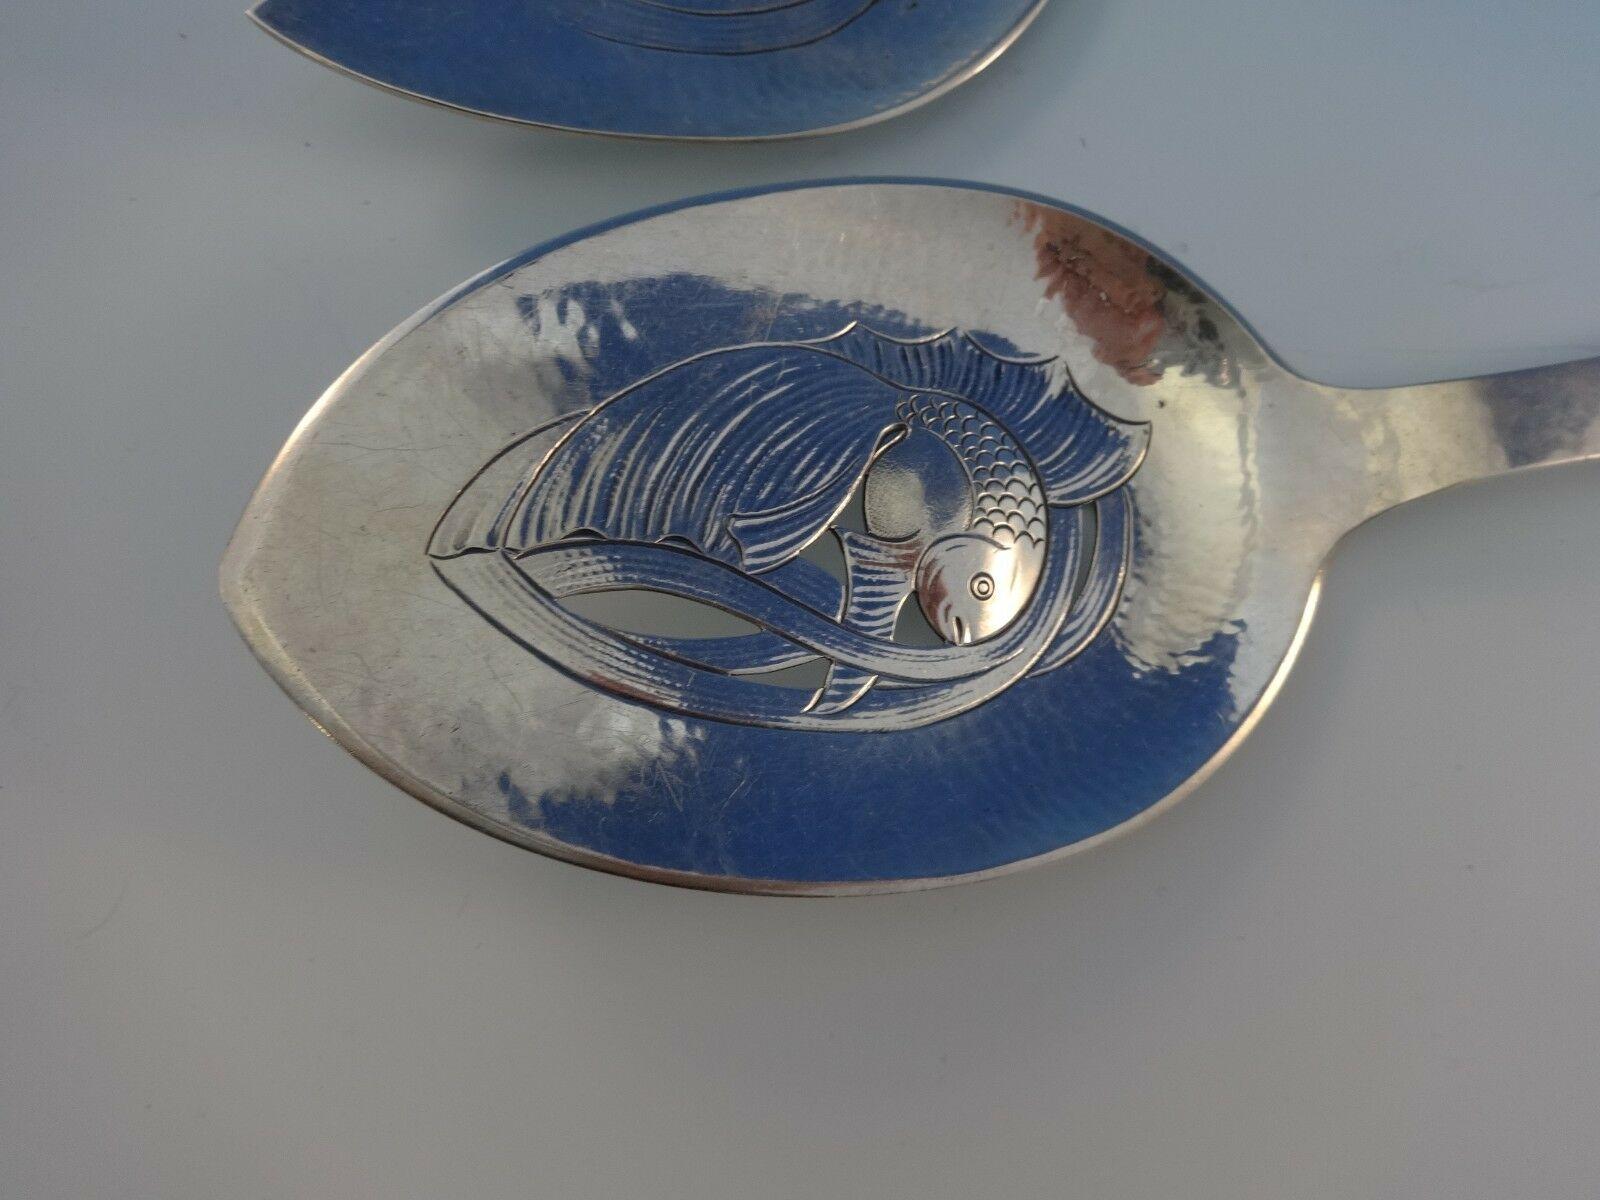 Danish Moderne handmade 826 silver fish serving set with fish 2 piece dated 1937. (Maker is unknown.) It is not monogrammed and is in excellent condition. Fabulous detailing & hand hammering. Reminiscent of Georg Jensen silver - exceptional quality.